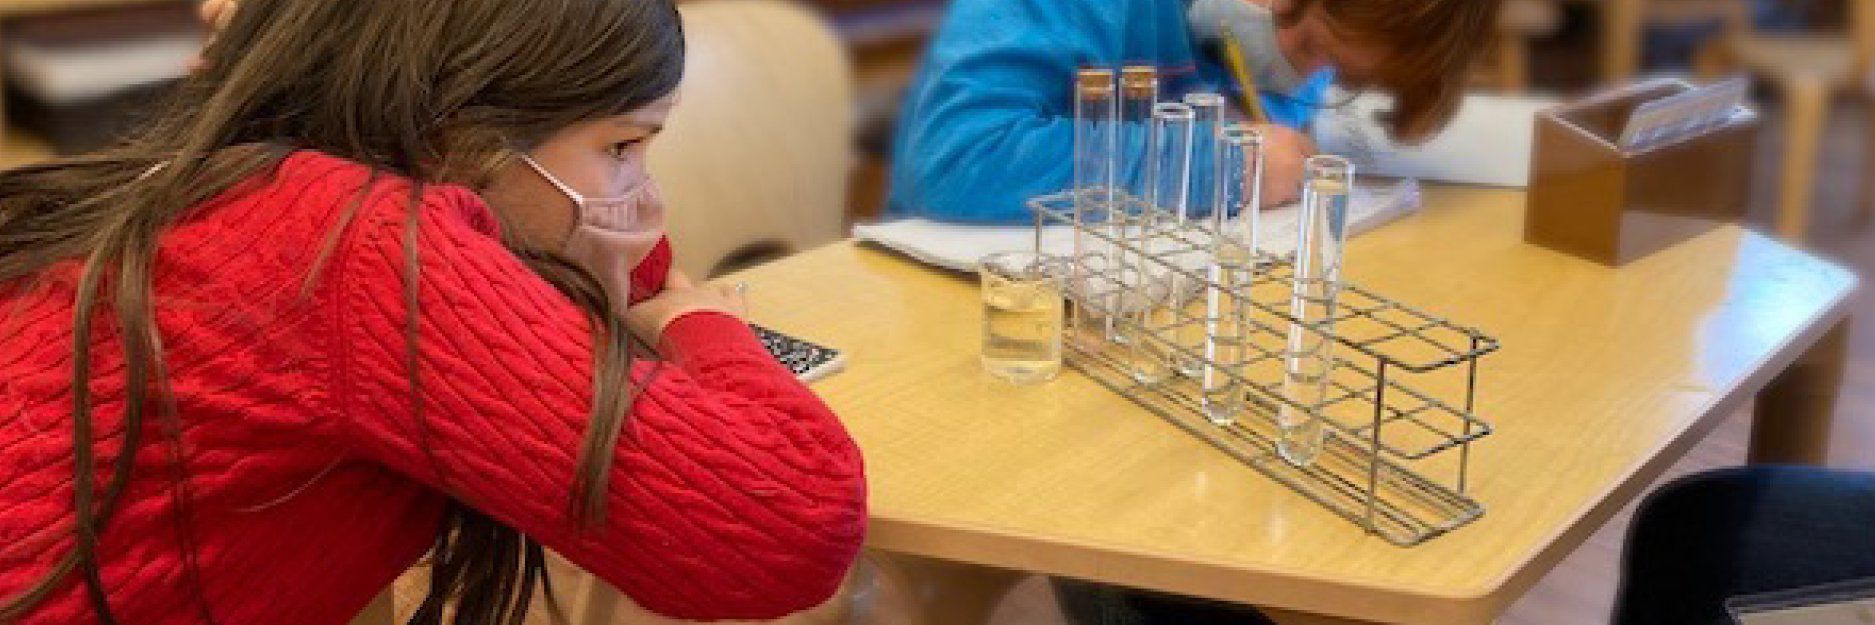 Female elementary student at table looking at test tubes in a rack